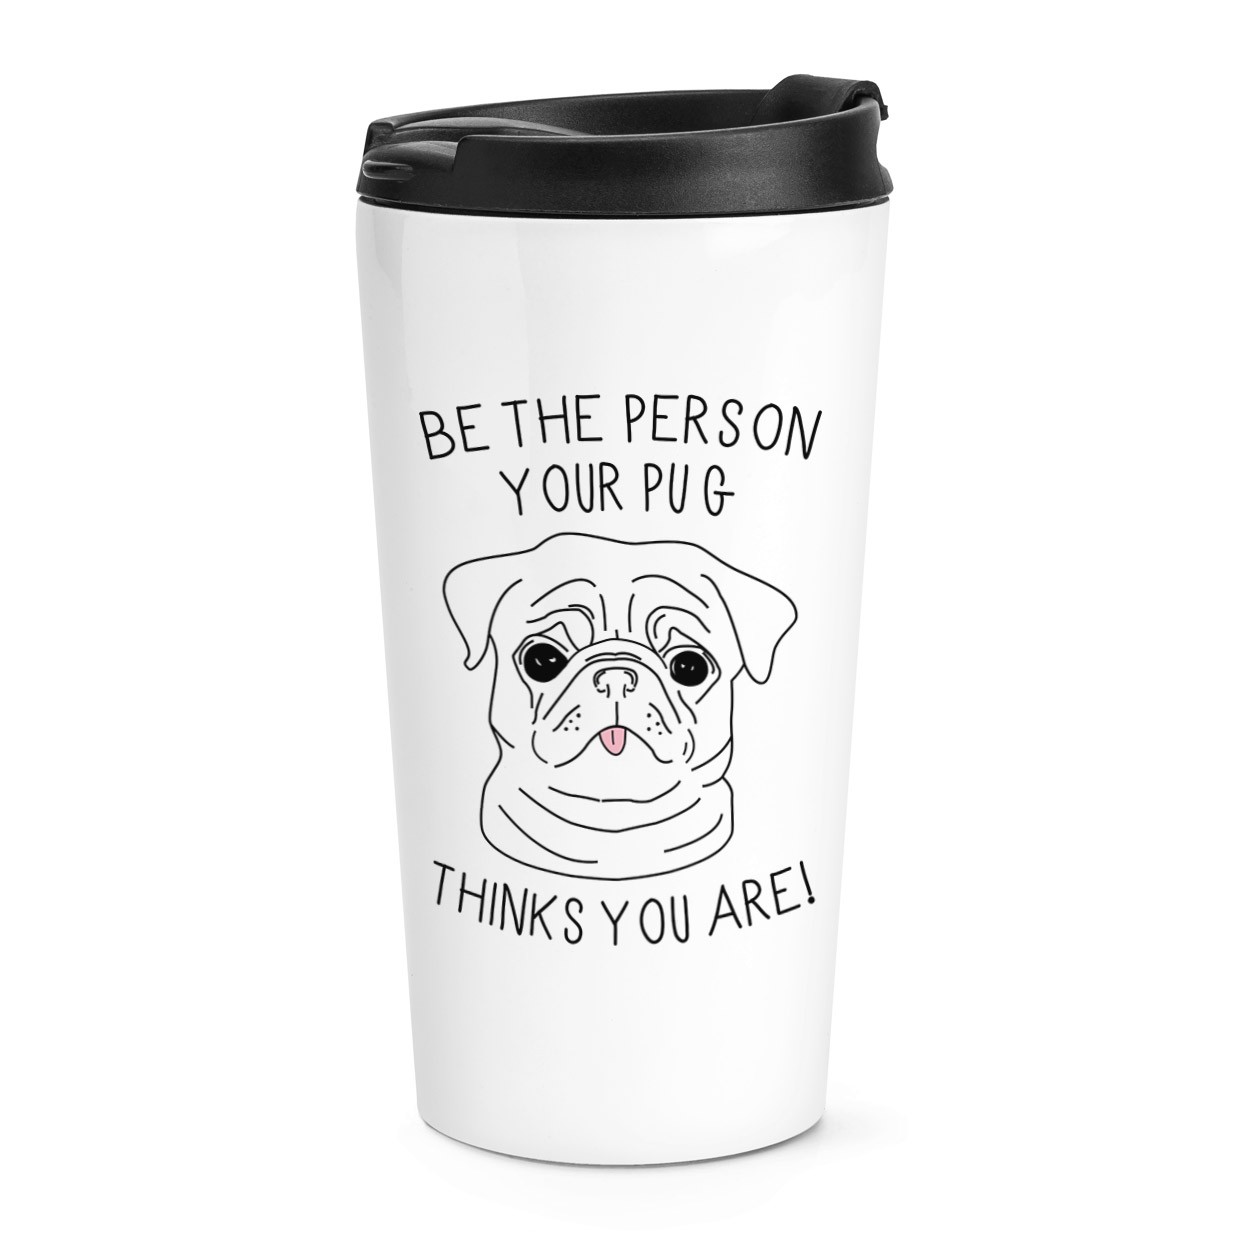 Be The Person Your Pug Thinks You Are Travel Mug Cup